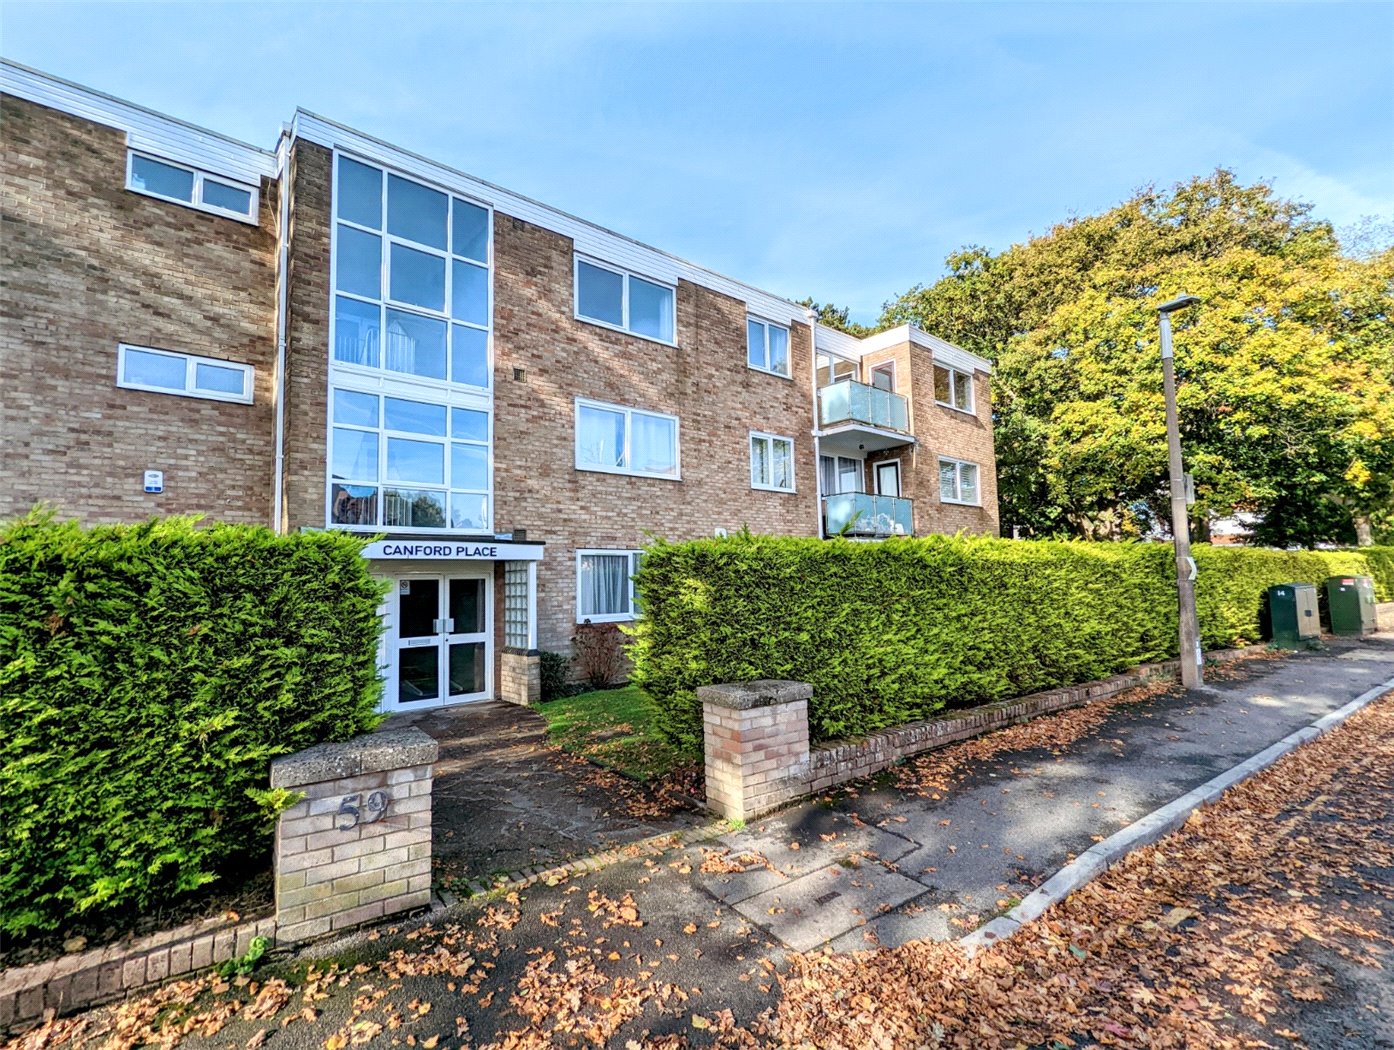 Canford Place, 59 Cliff Drive, Poole, BH13